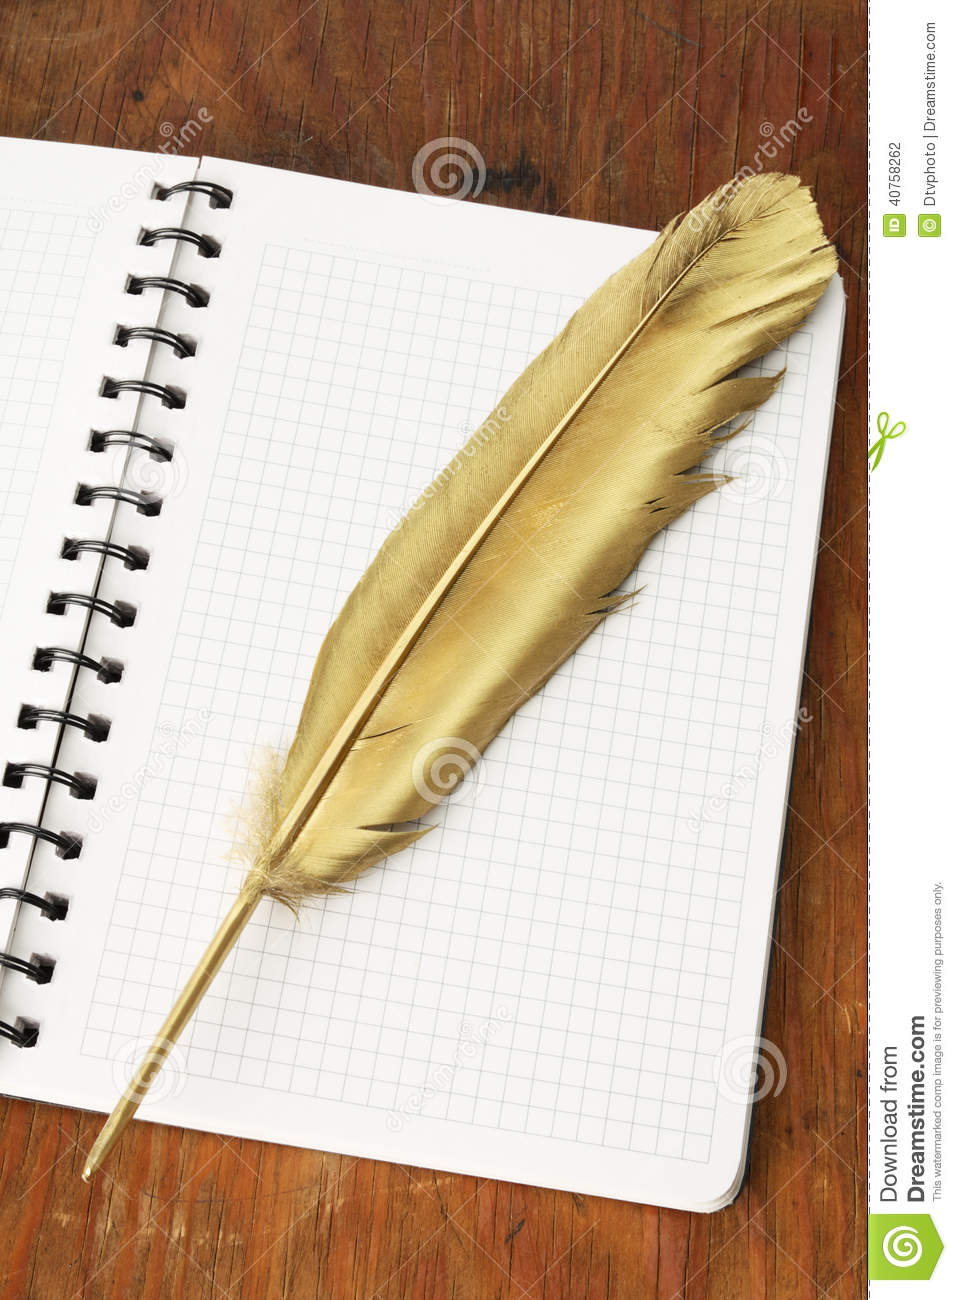 Gold Quill Pen Of Firebird On A Notebook And Wooden Table